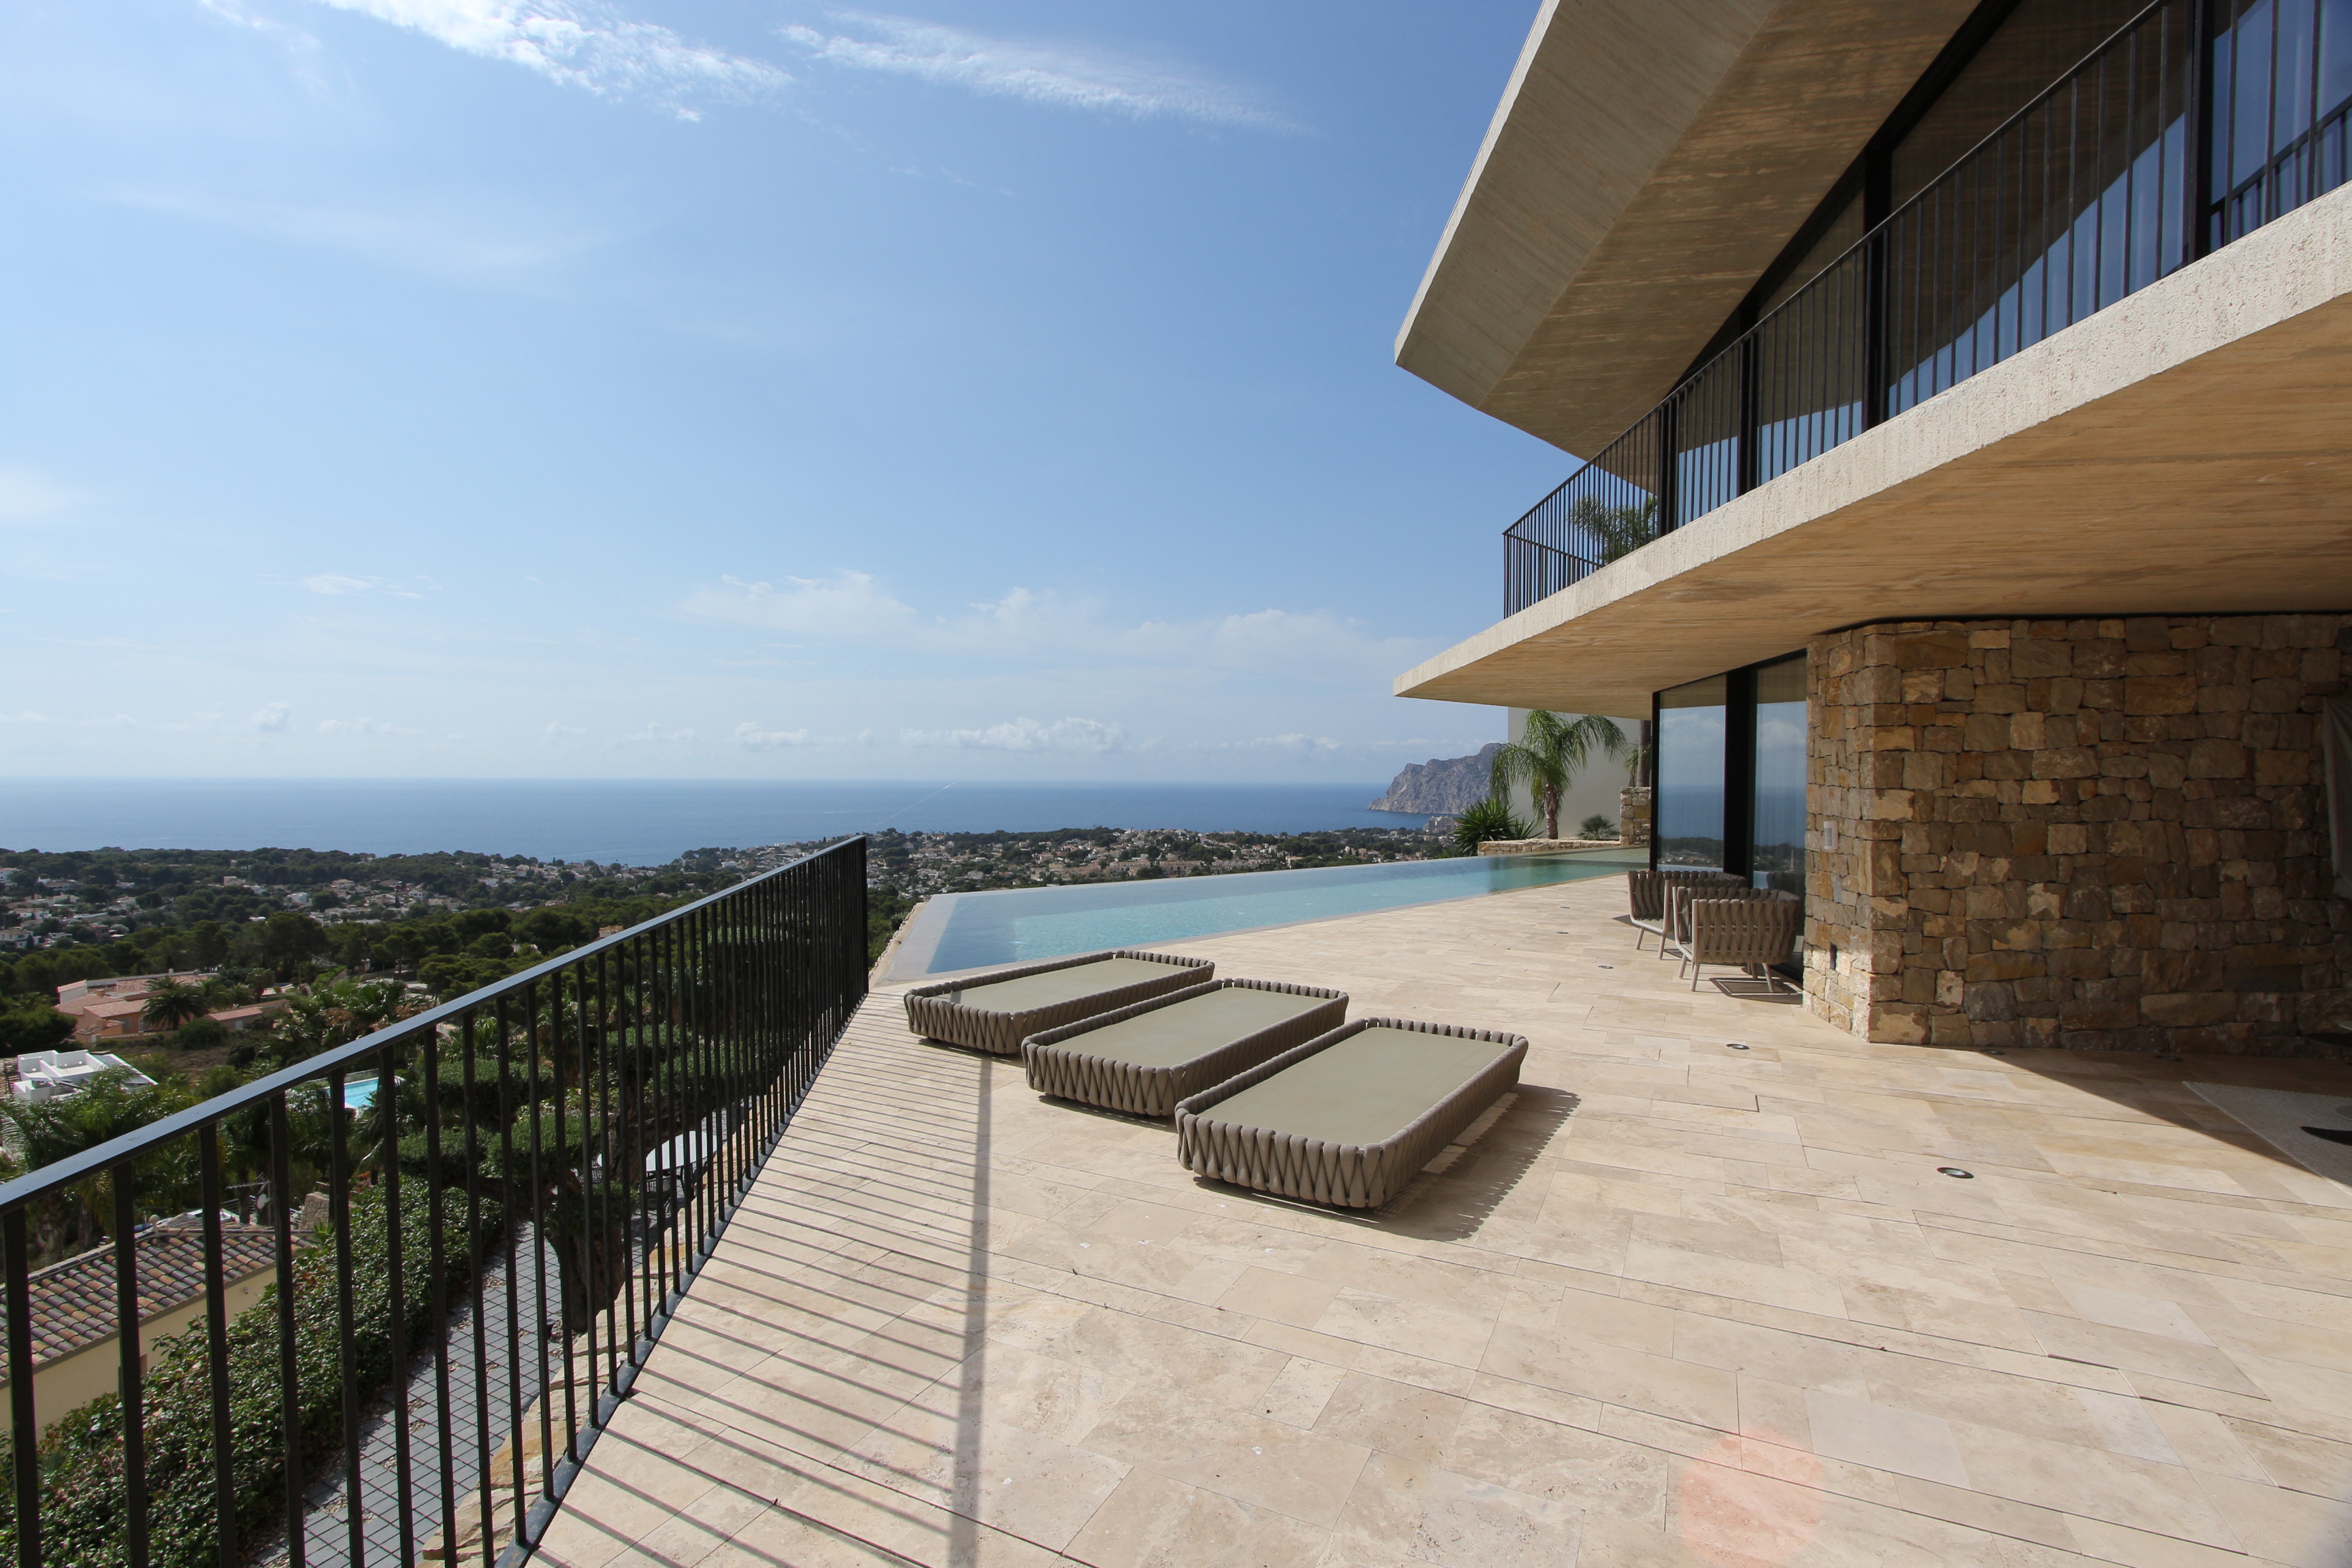 LUXURY VILLA WITH PANORAMIC SEA VIEWS IN A PRIME LOCATION